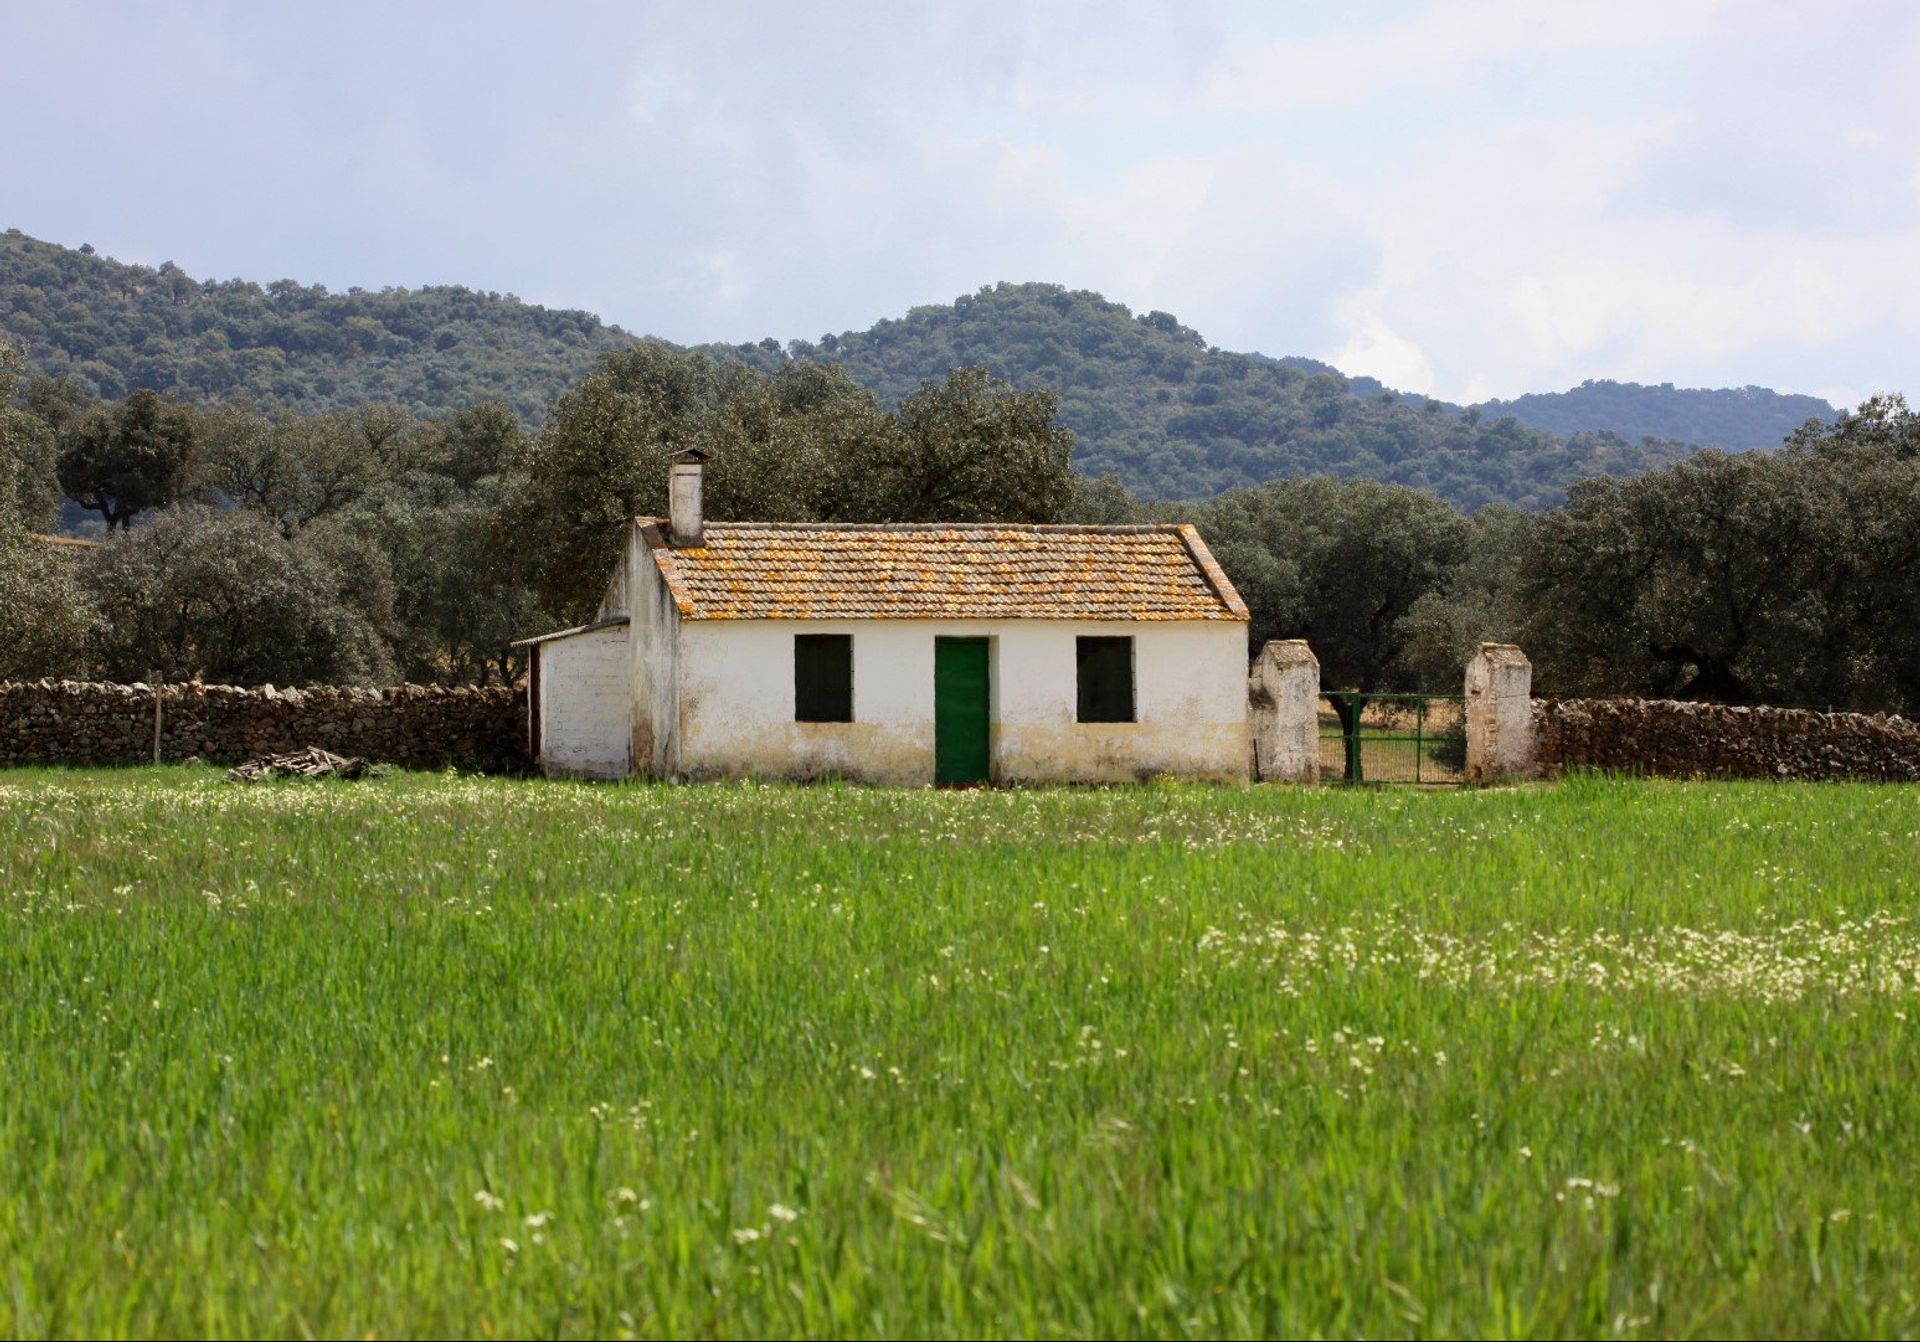 You can sense the peace and quietude of the hilly Andalusian landscape just by looking at this rustic countryside cottage